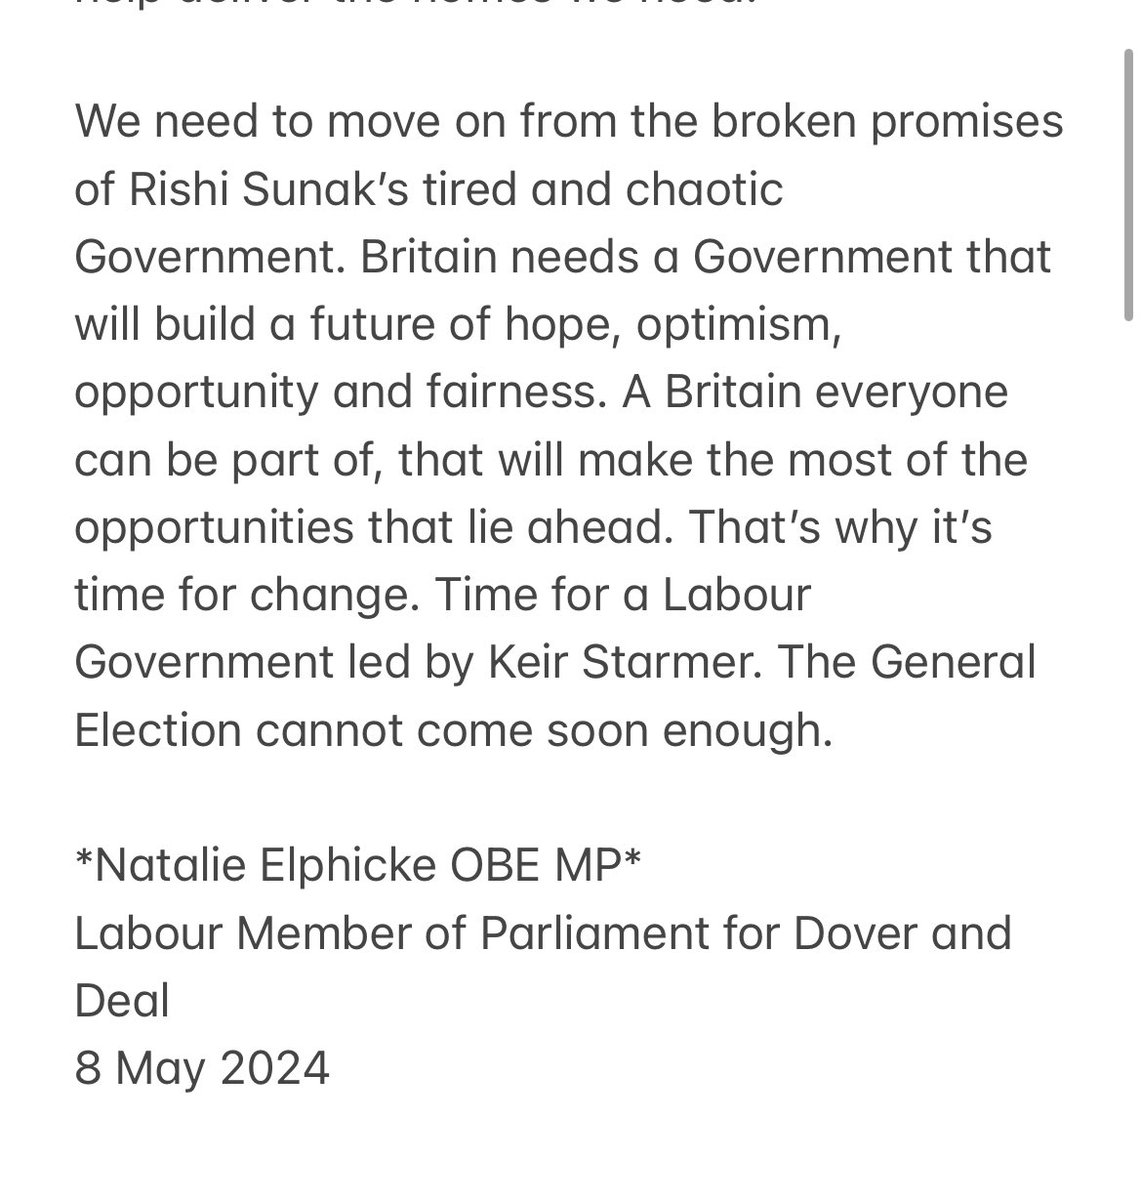 Full statement from Elphicke: “For me key deciding factors have been housing and the safety and security of our borders” “We need to move on the broken promises of Rishi Sunak’s tired and chaotic Government”